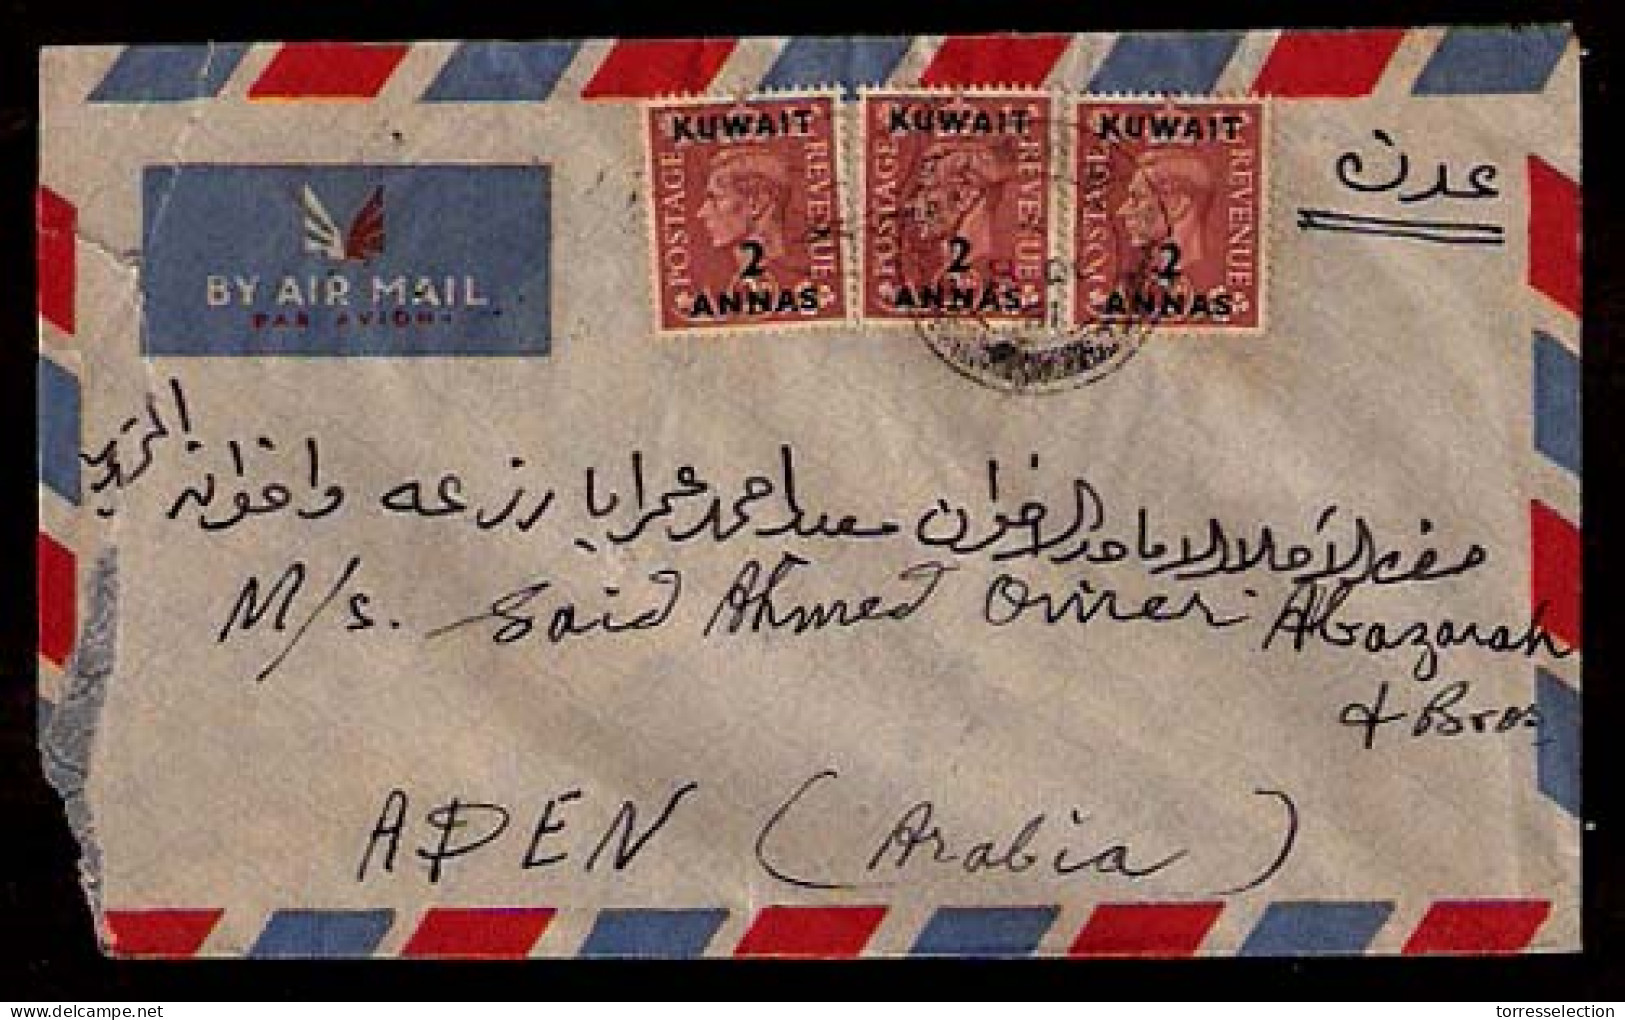 KUWAIT. 1951. Fkd. Env. 2a X 3. To Aden / Airmail. - Koweït